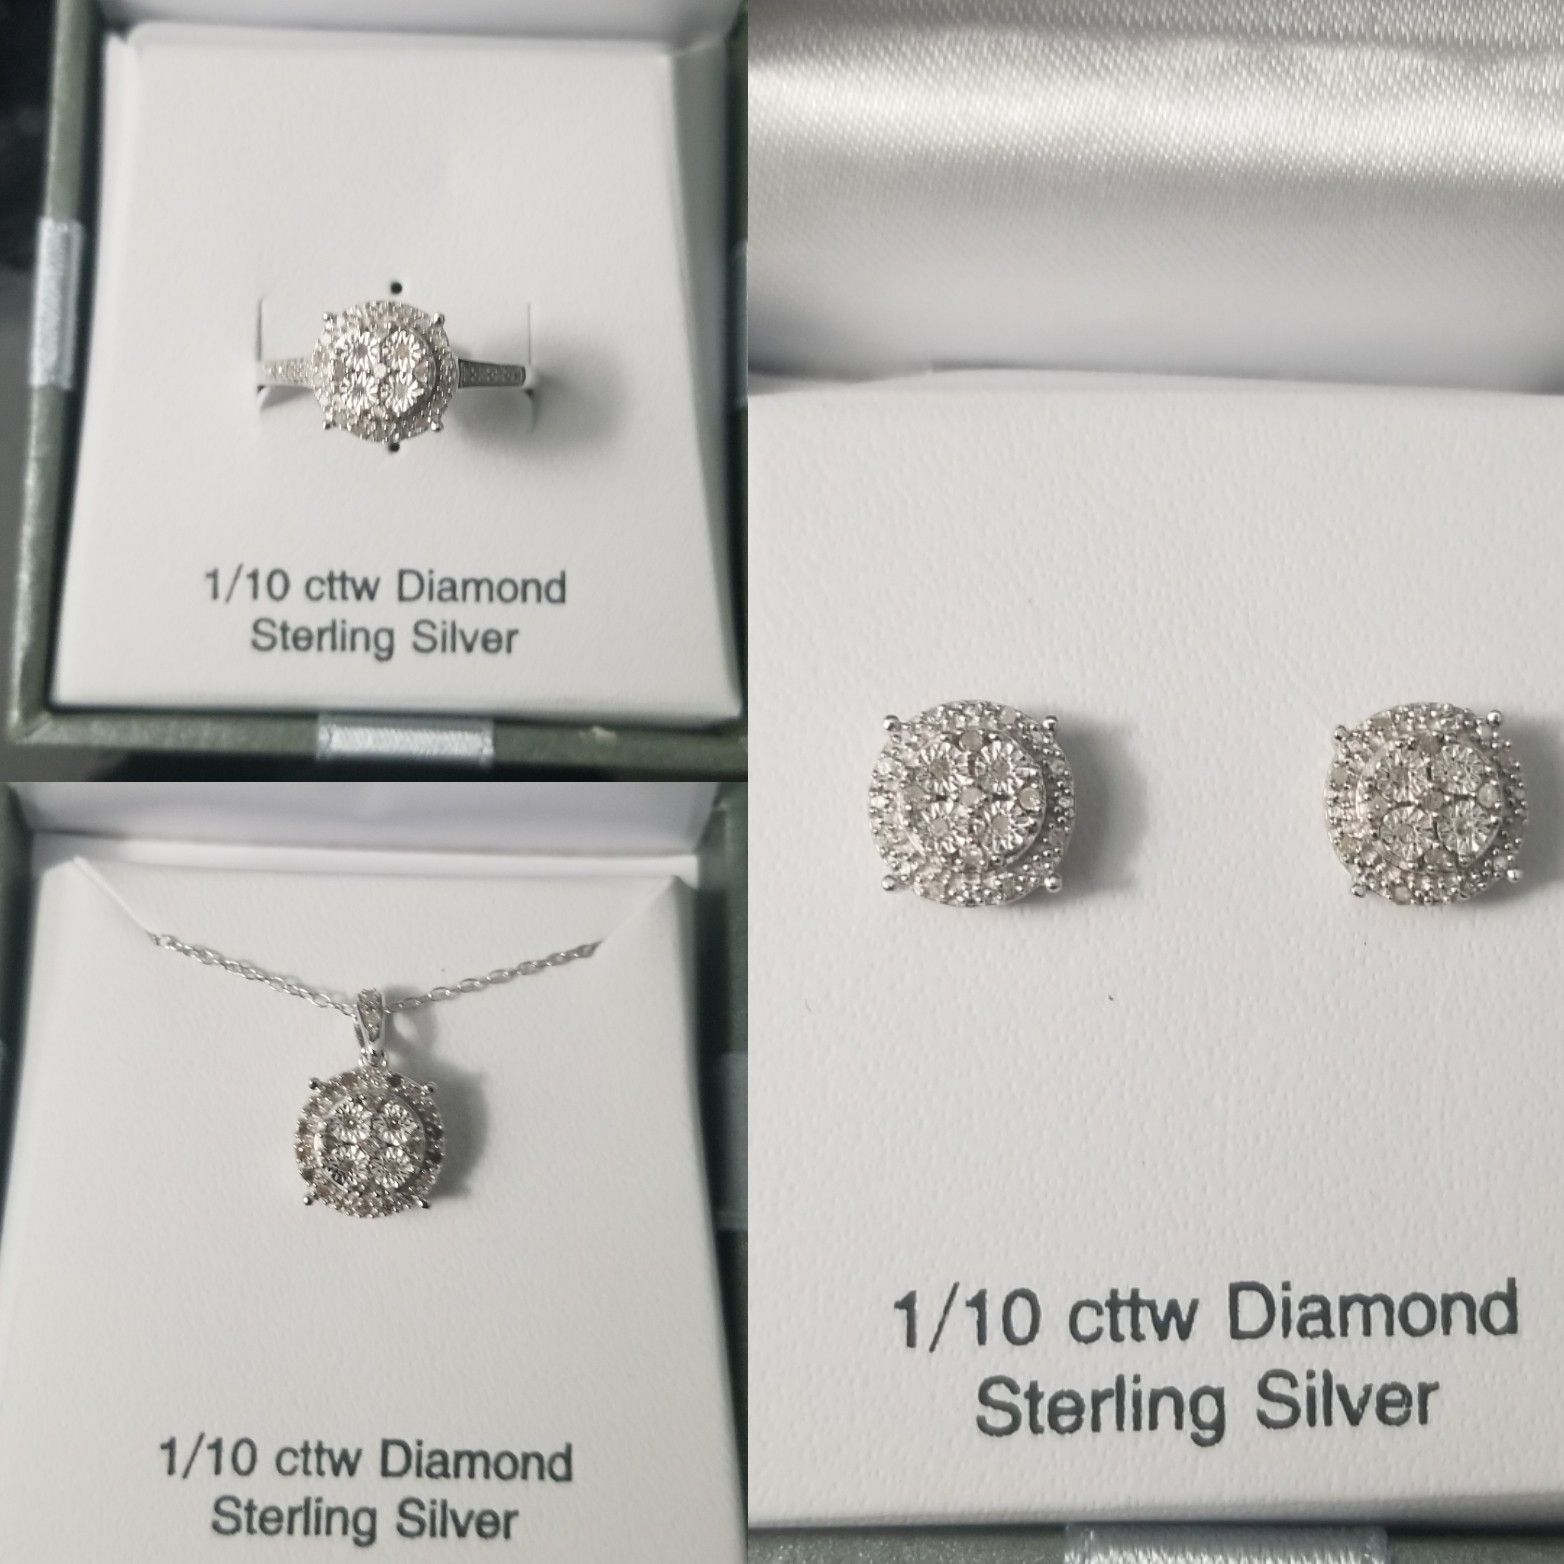 ❤SALE 🎆SALE 💗SALE❣ Real Diamond Ring Earring Necklace Set